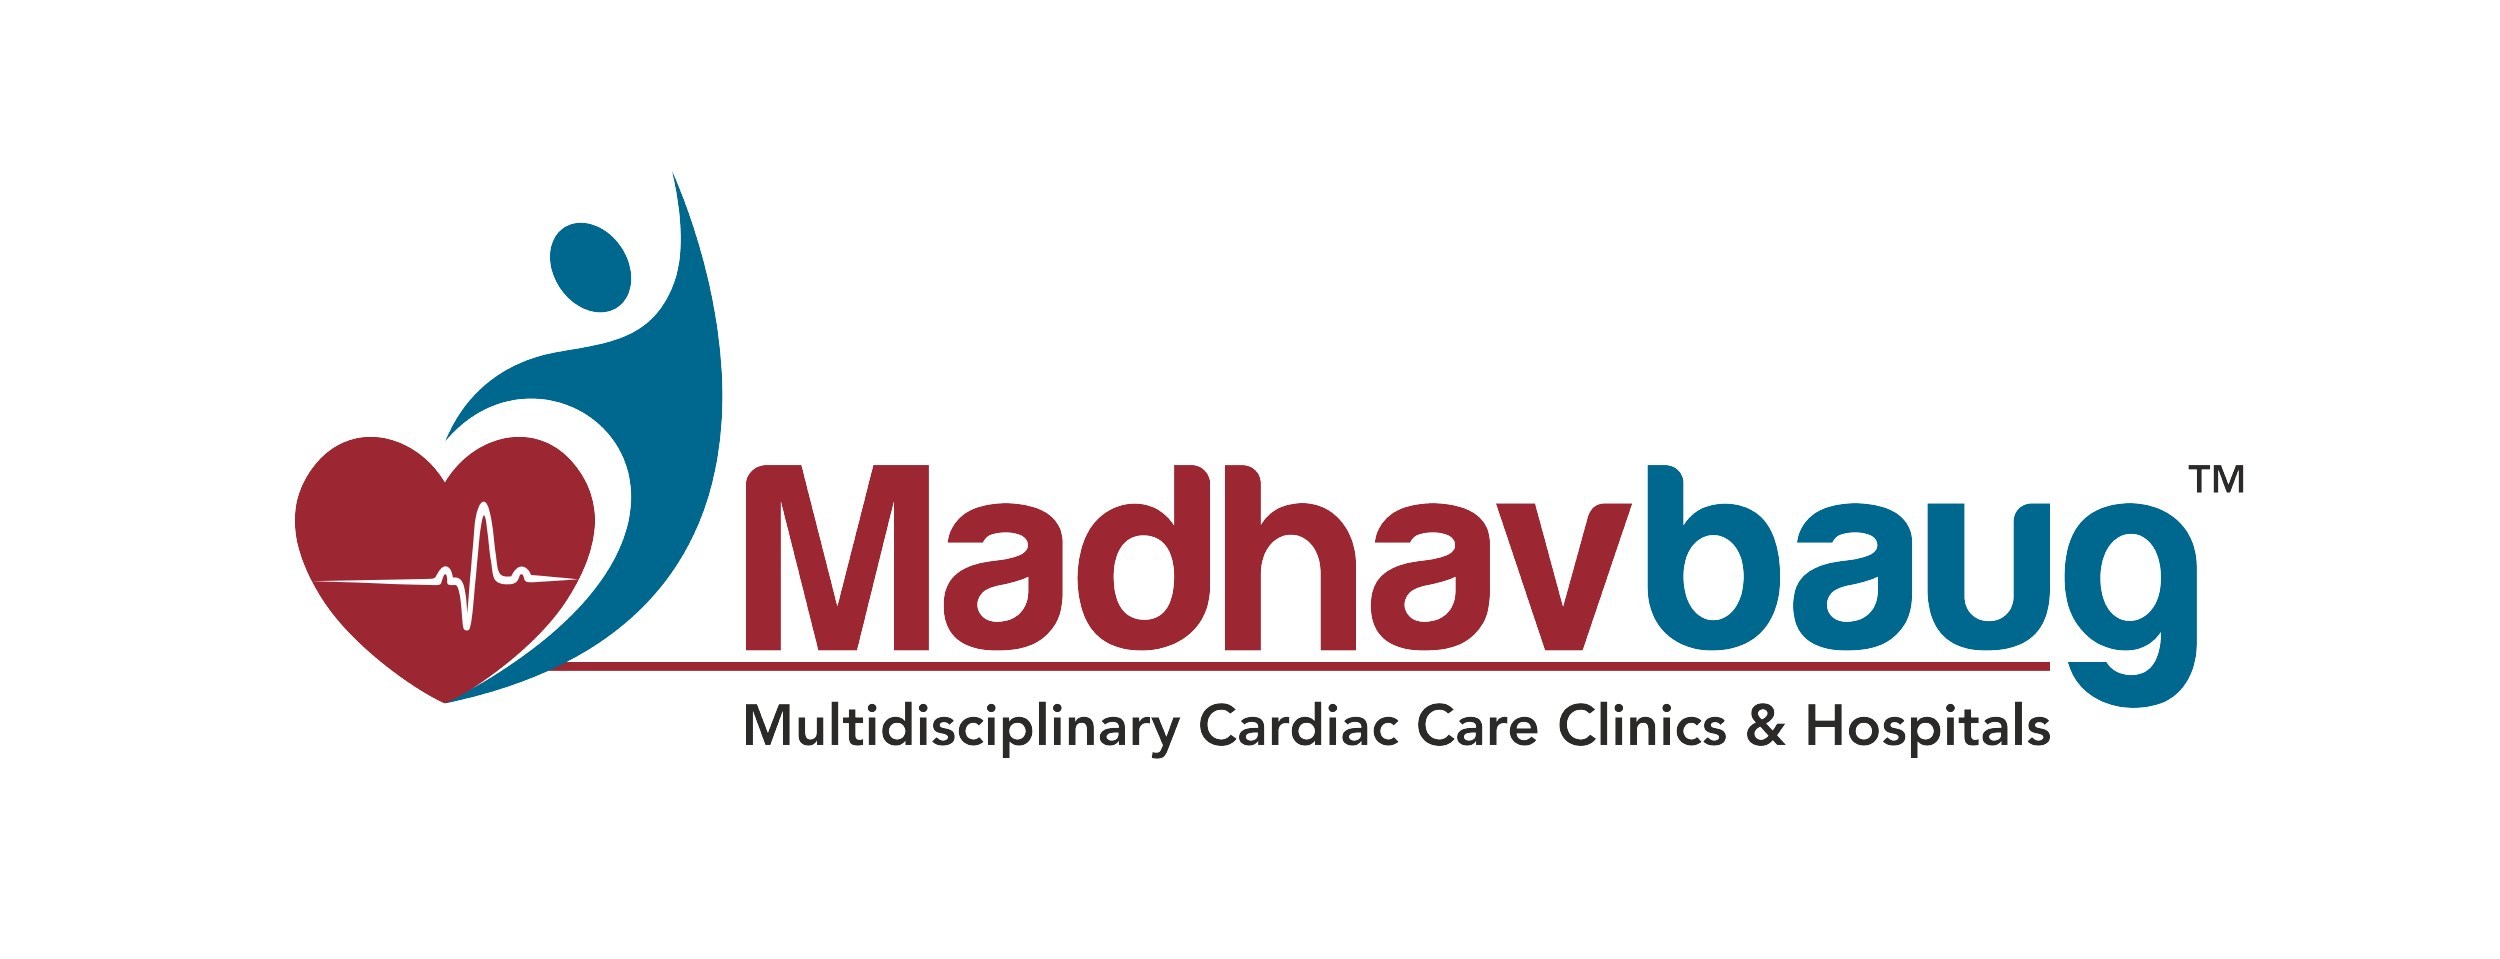 Madhavbaug Launches App for Heart Patients and Diabetics for Home Care ...